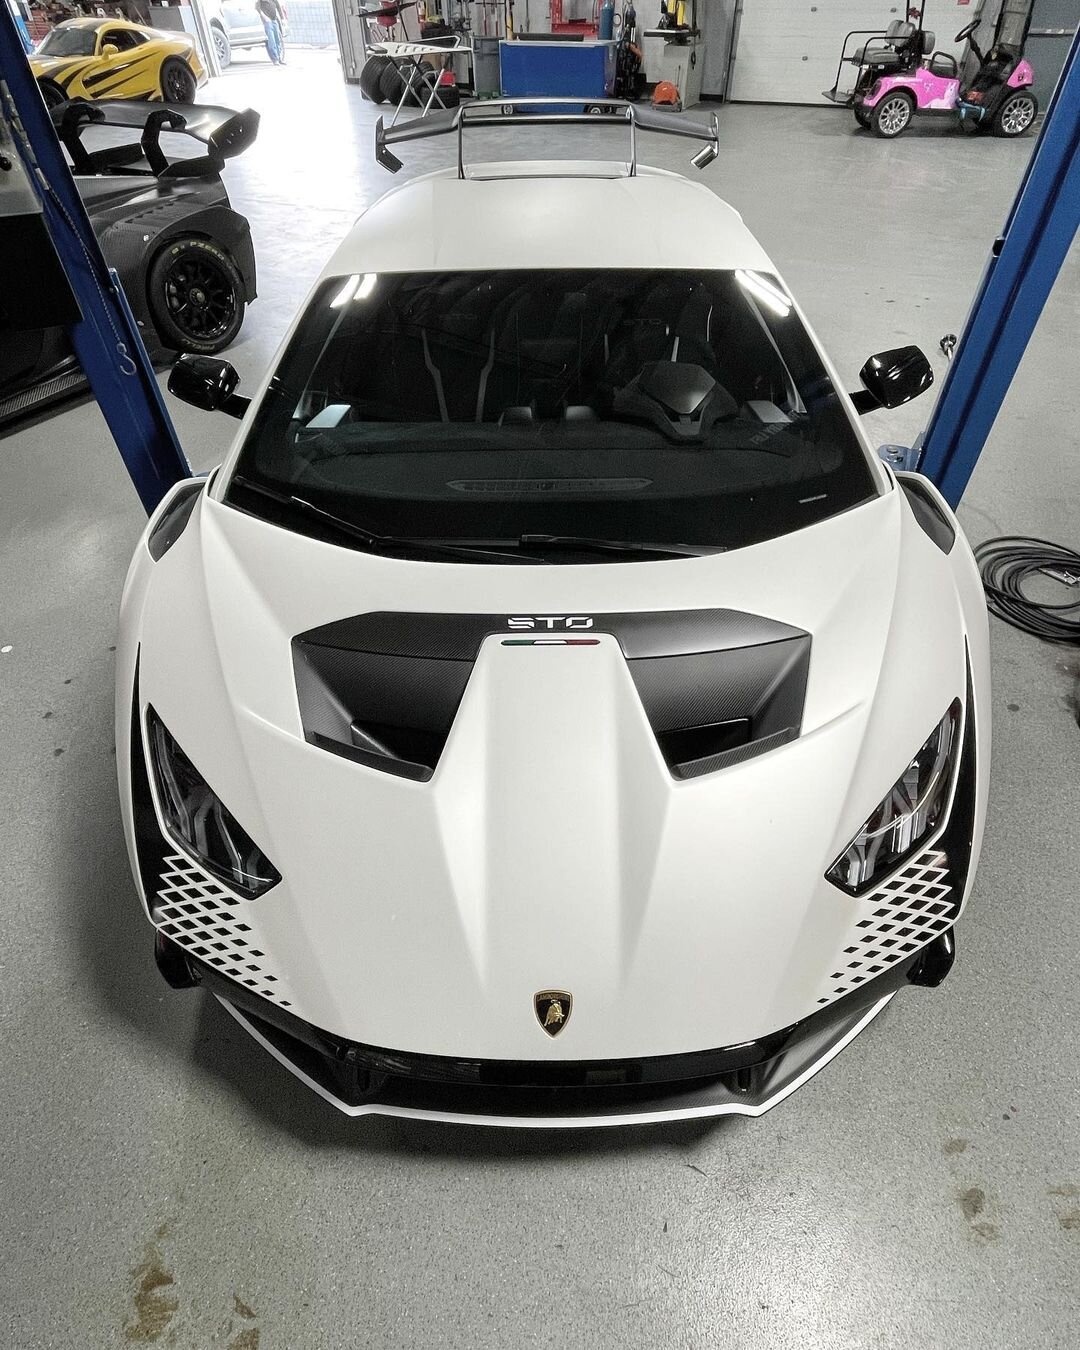 2022 Lamborghini Hurac&aacute;n STO, owned by @sparklefarts14, just got even better with the installation of the Voodoo Design Catback Exhaust system by @loftusmotorsports  in Arizona. Get ready for a more powerful sound and performance from your sup